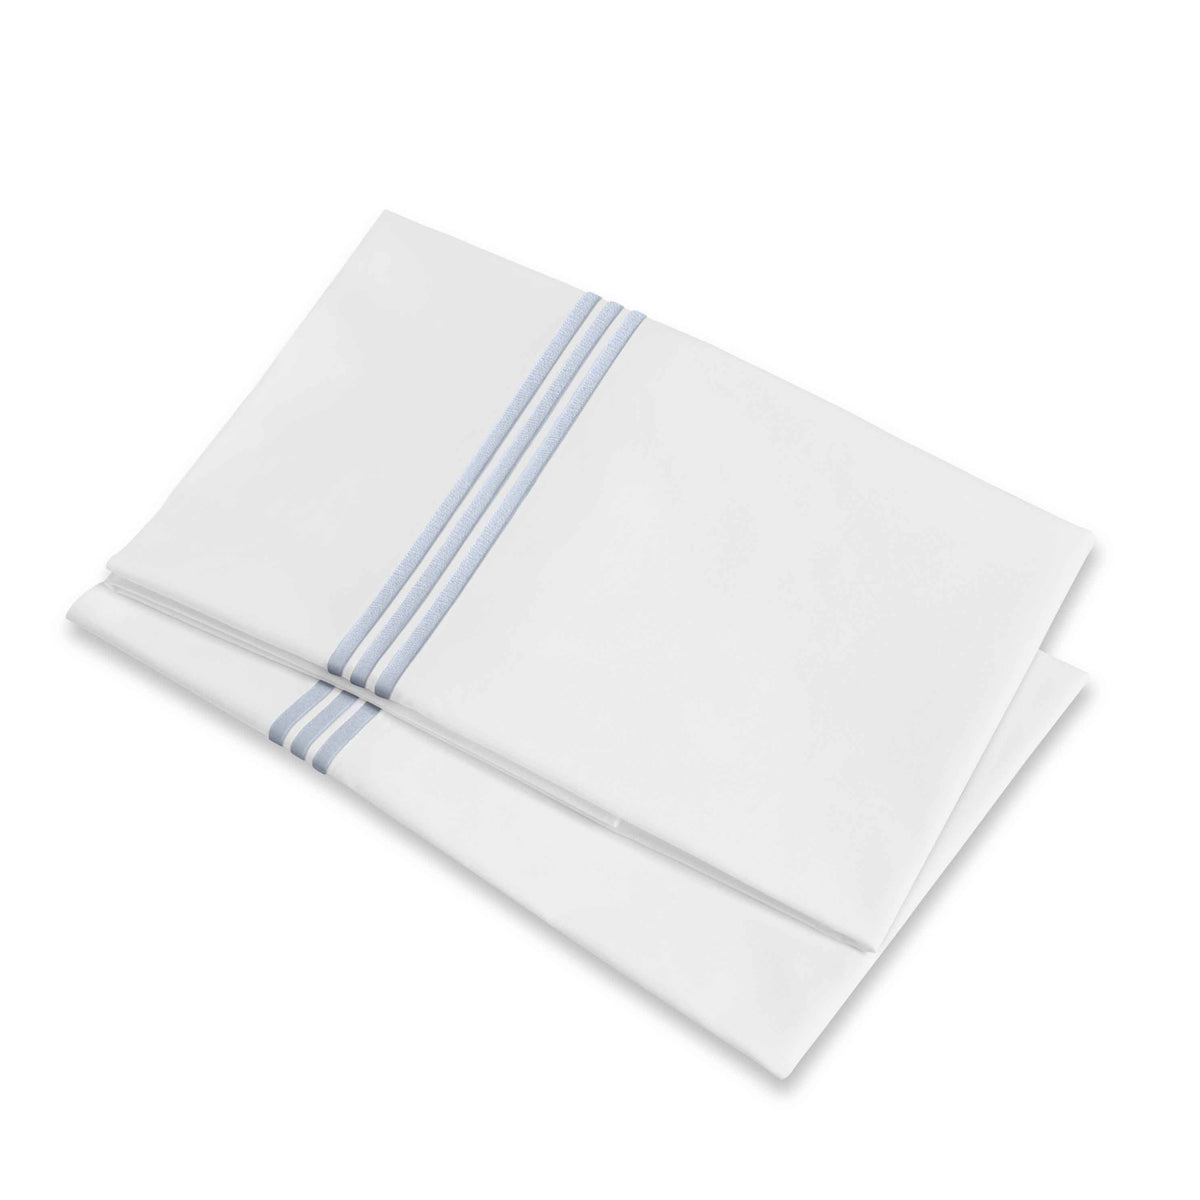 Folded Pillowcases of Signoria Platinum Percale Bedding in White/Sky Blue Color